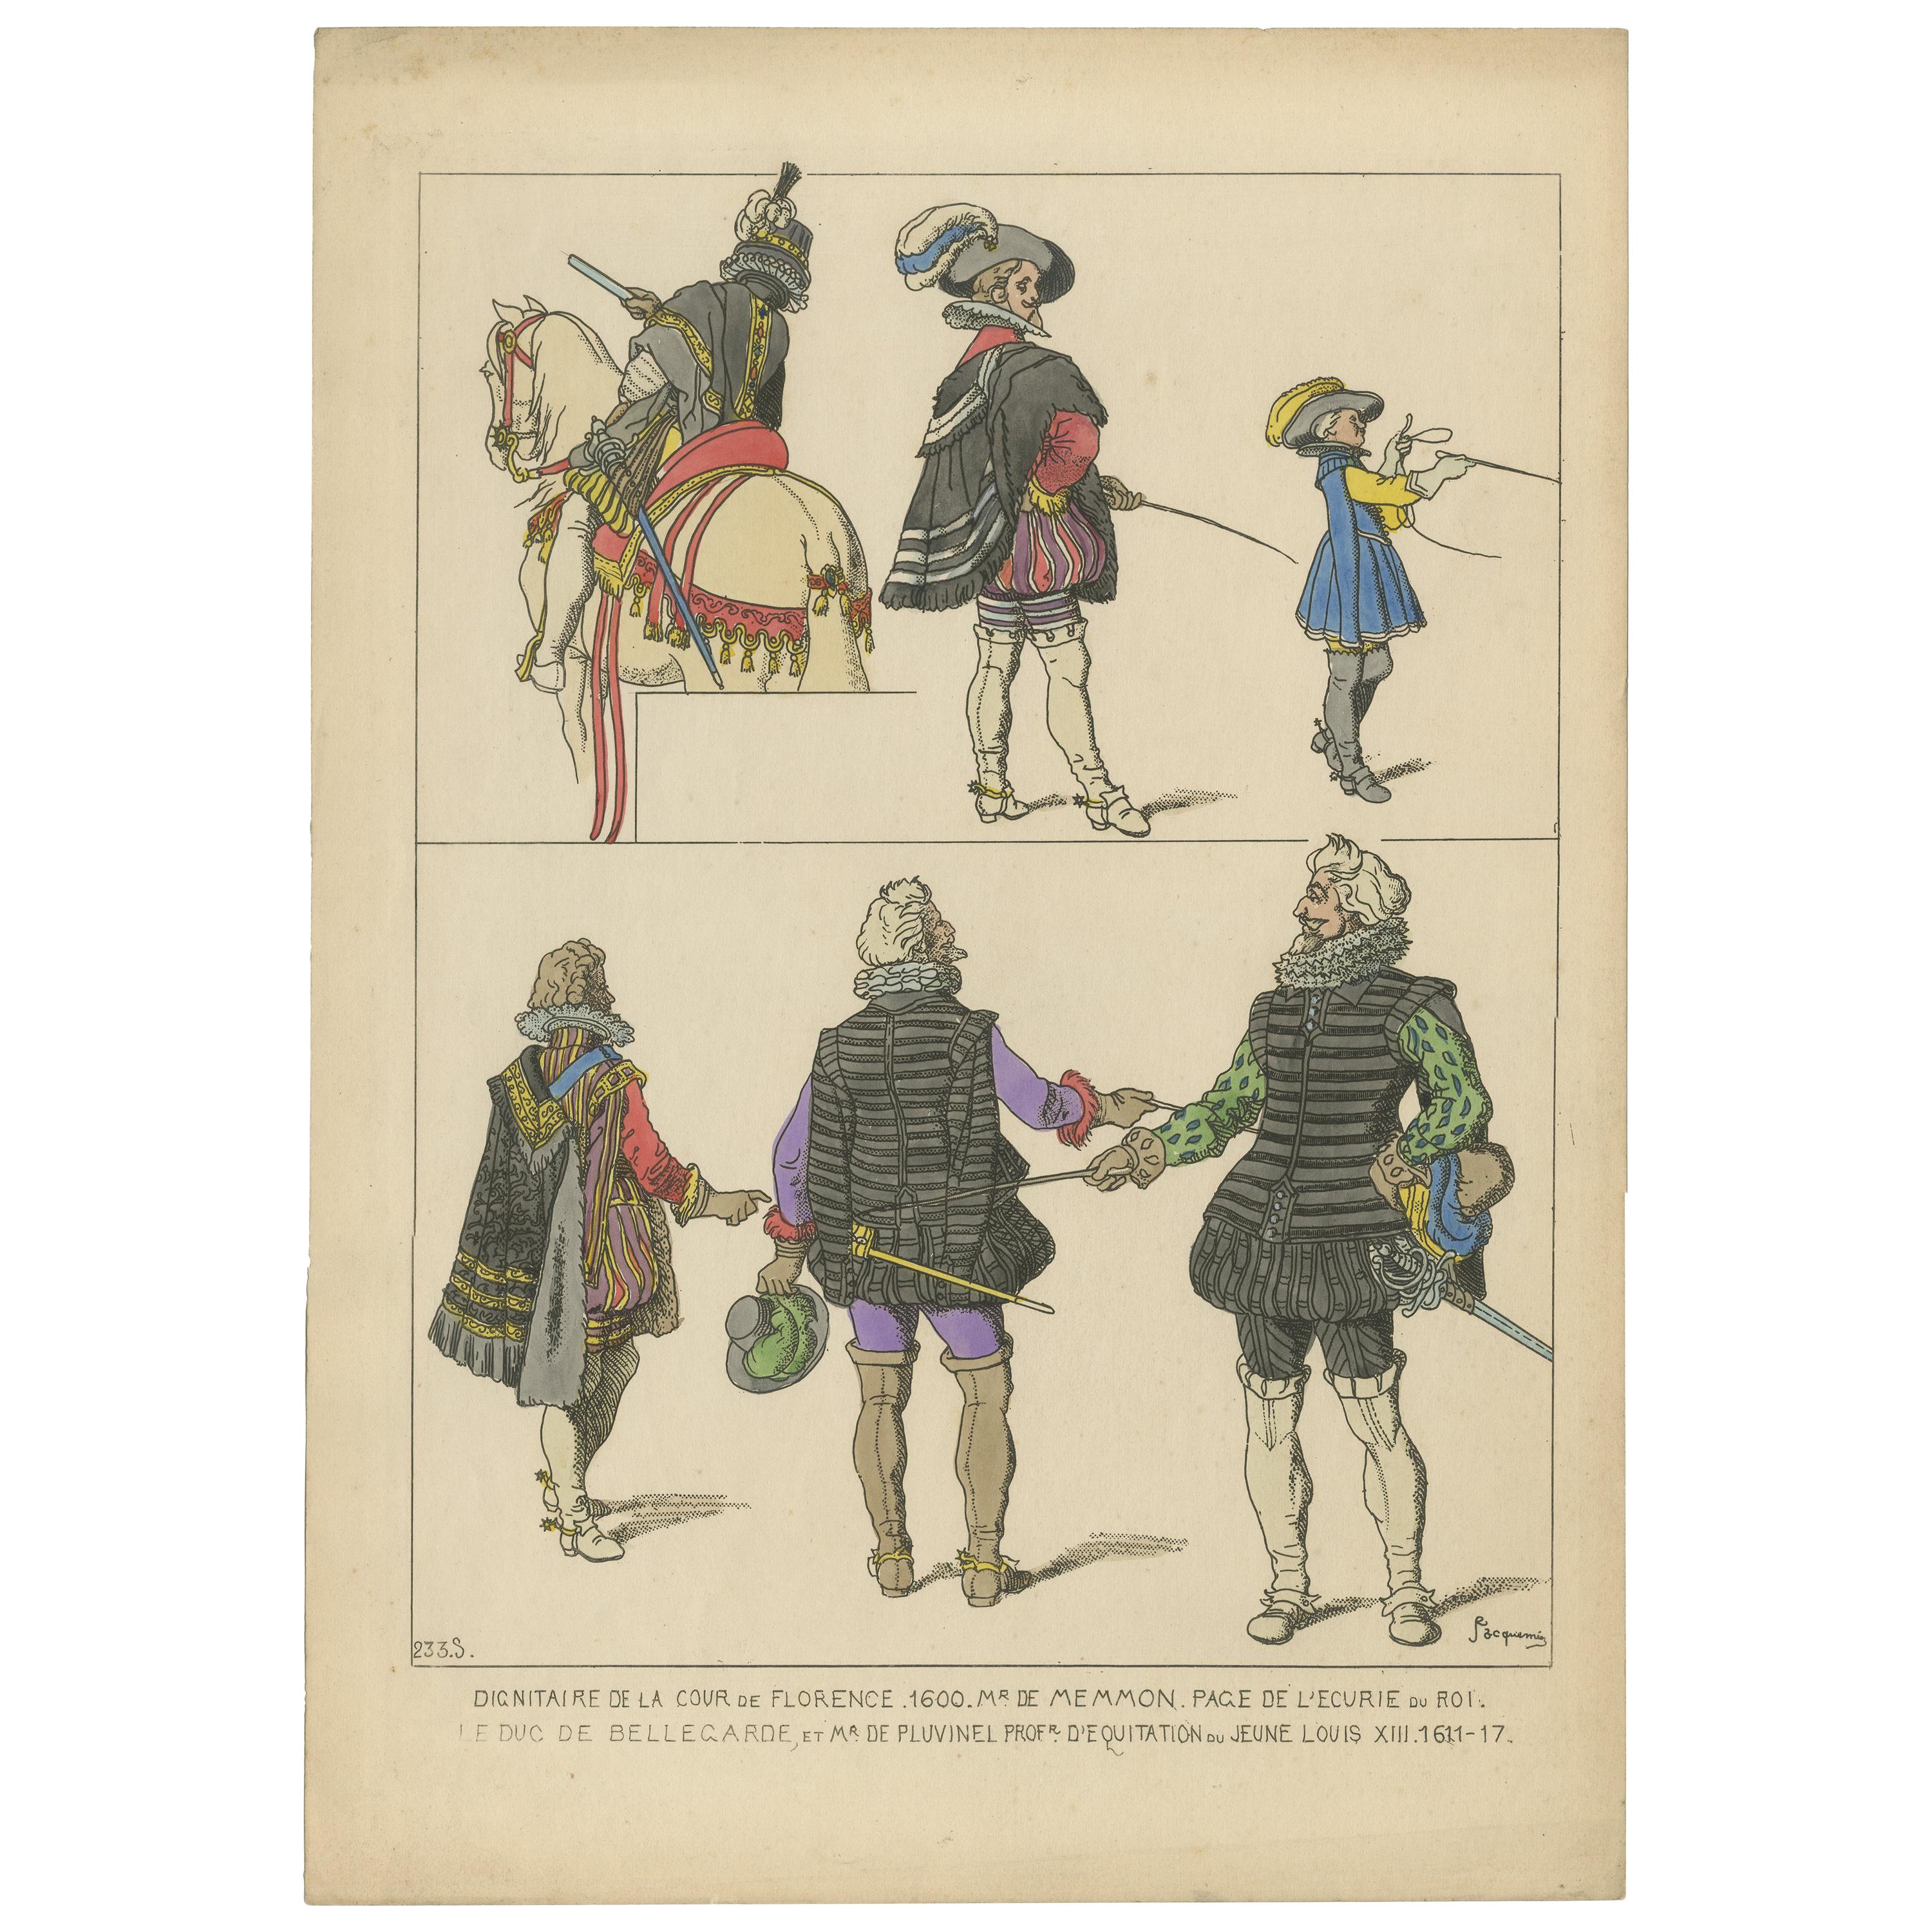 Antique Print of Figures from the Court of Florence by Jacquemin 'c.1870'